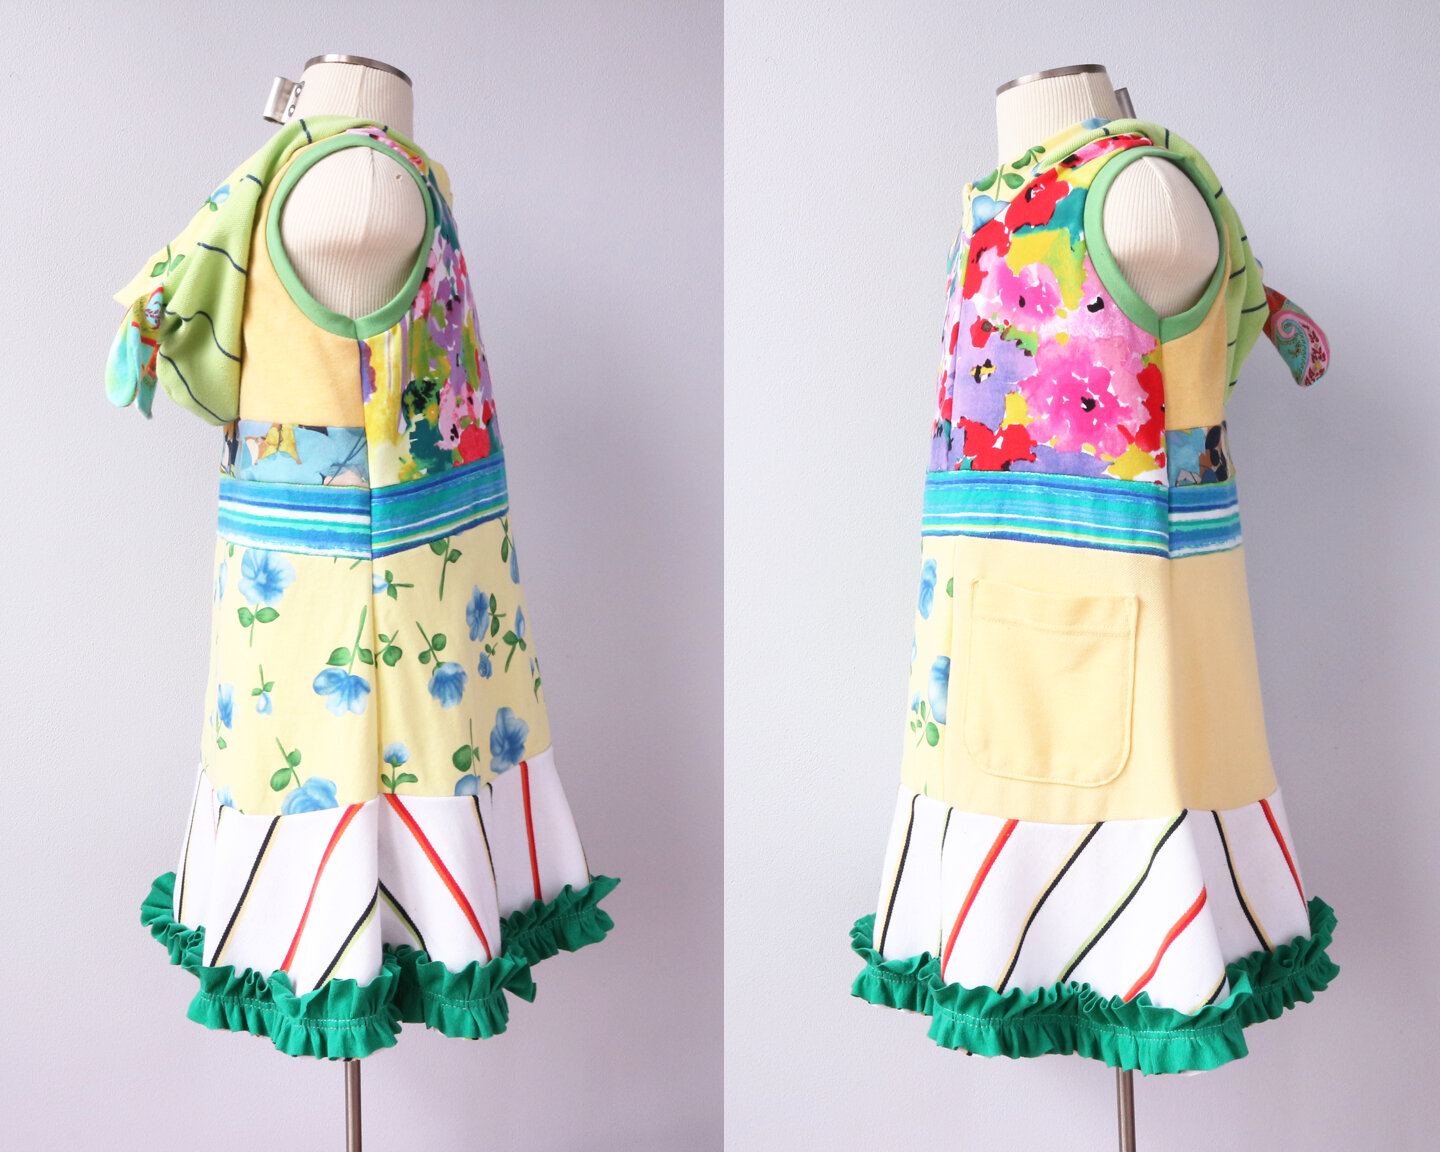 form side ⅚ yellow:floral:ruffle:pocket:bunny:hoodie.jpg